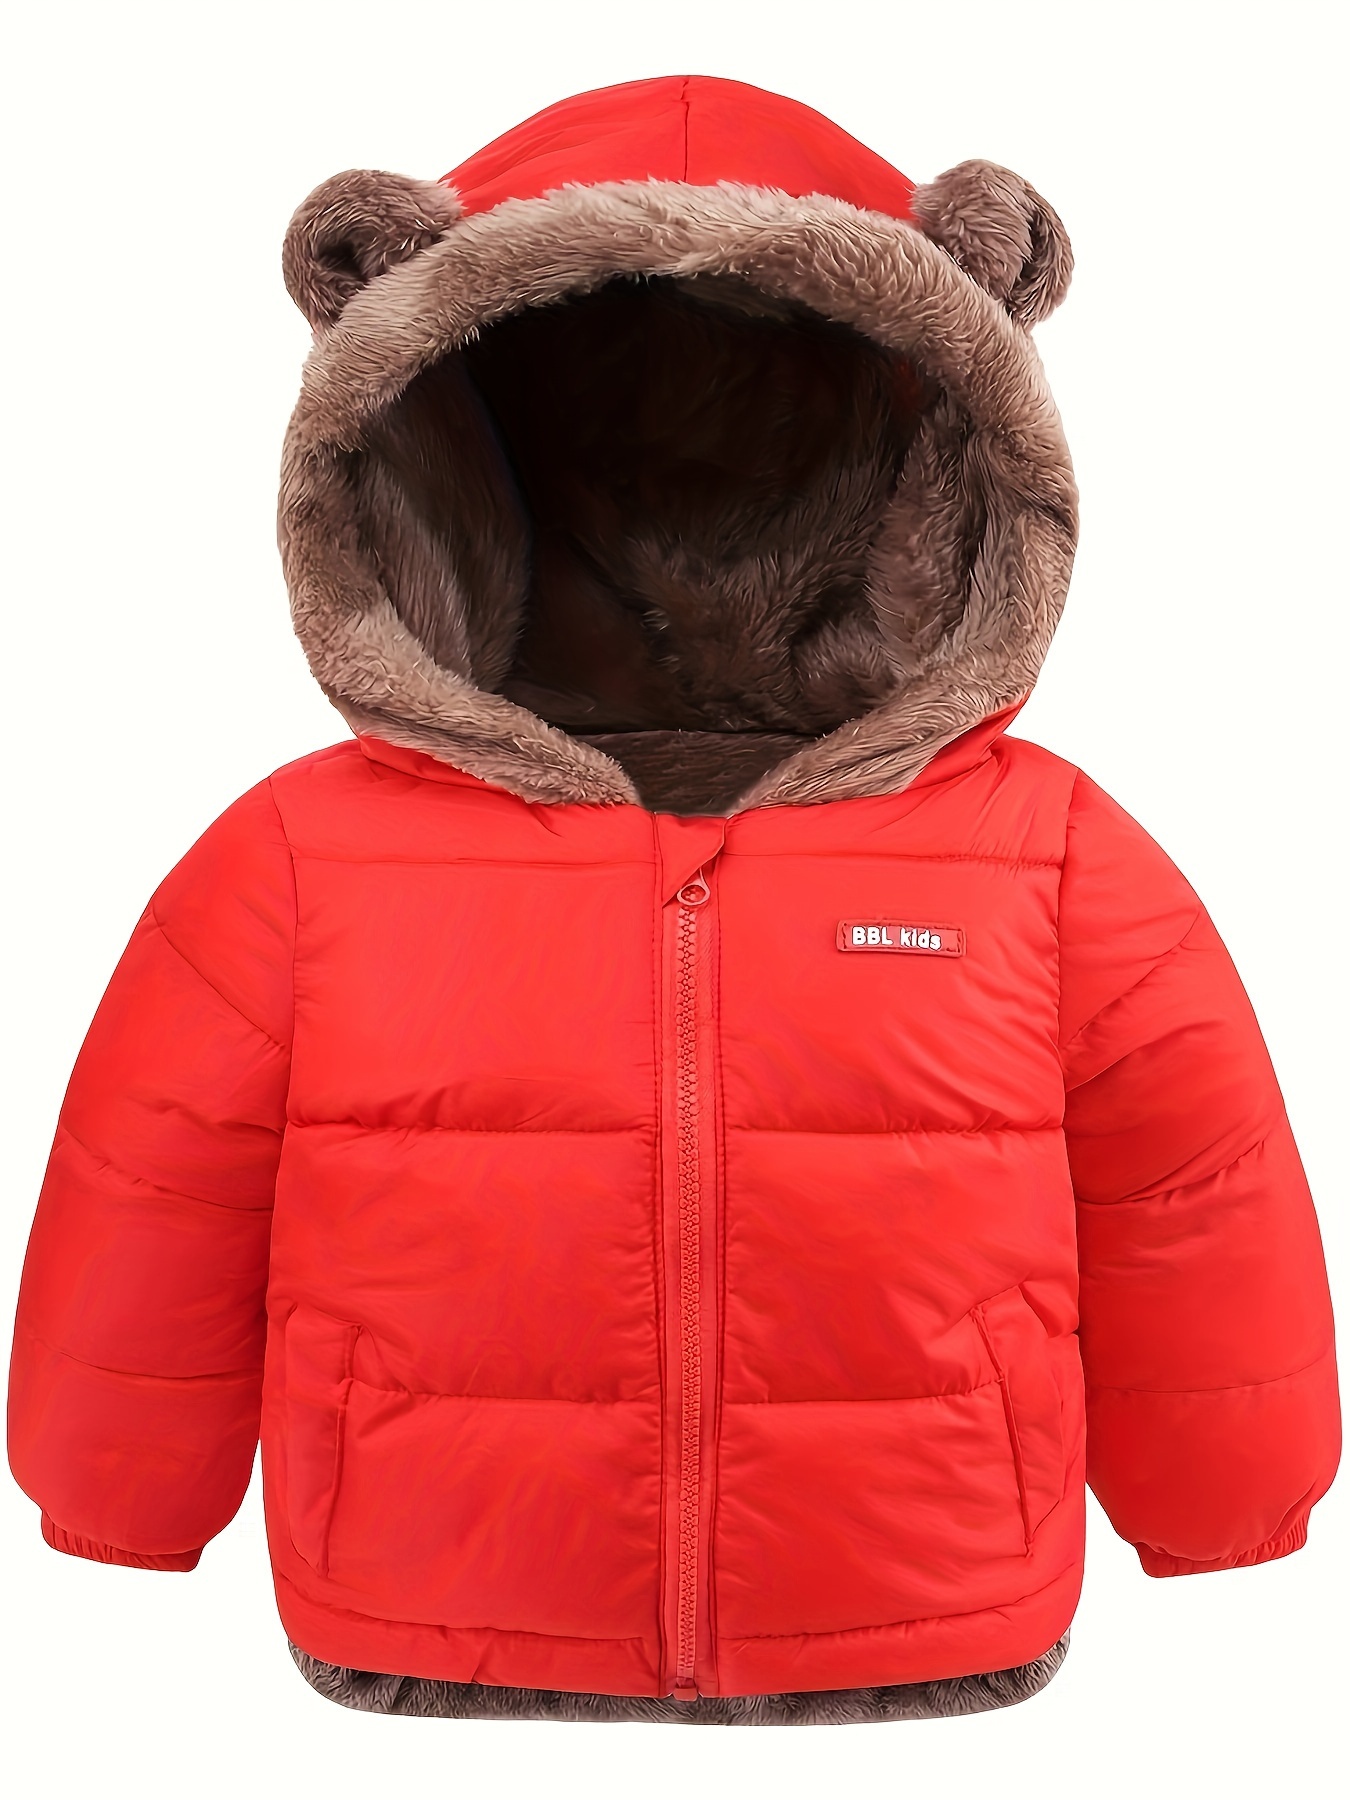 Boys/ Girls Winter Warm Cotton-padded Hooded Coat Outdoor Snow Suit, Teen  Kids Clothing For Winter/ Fall, Long Jacket Cout